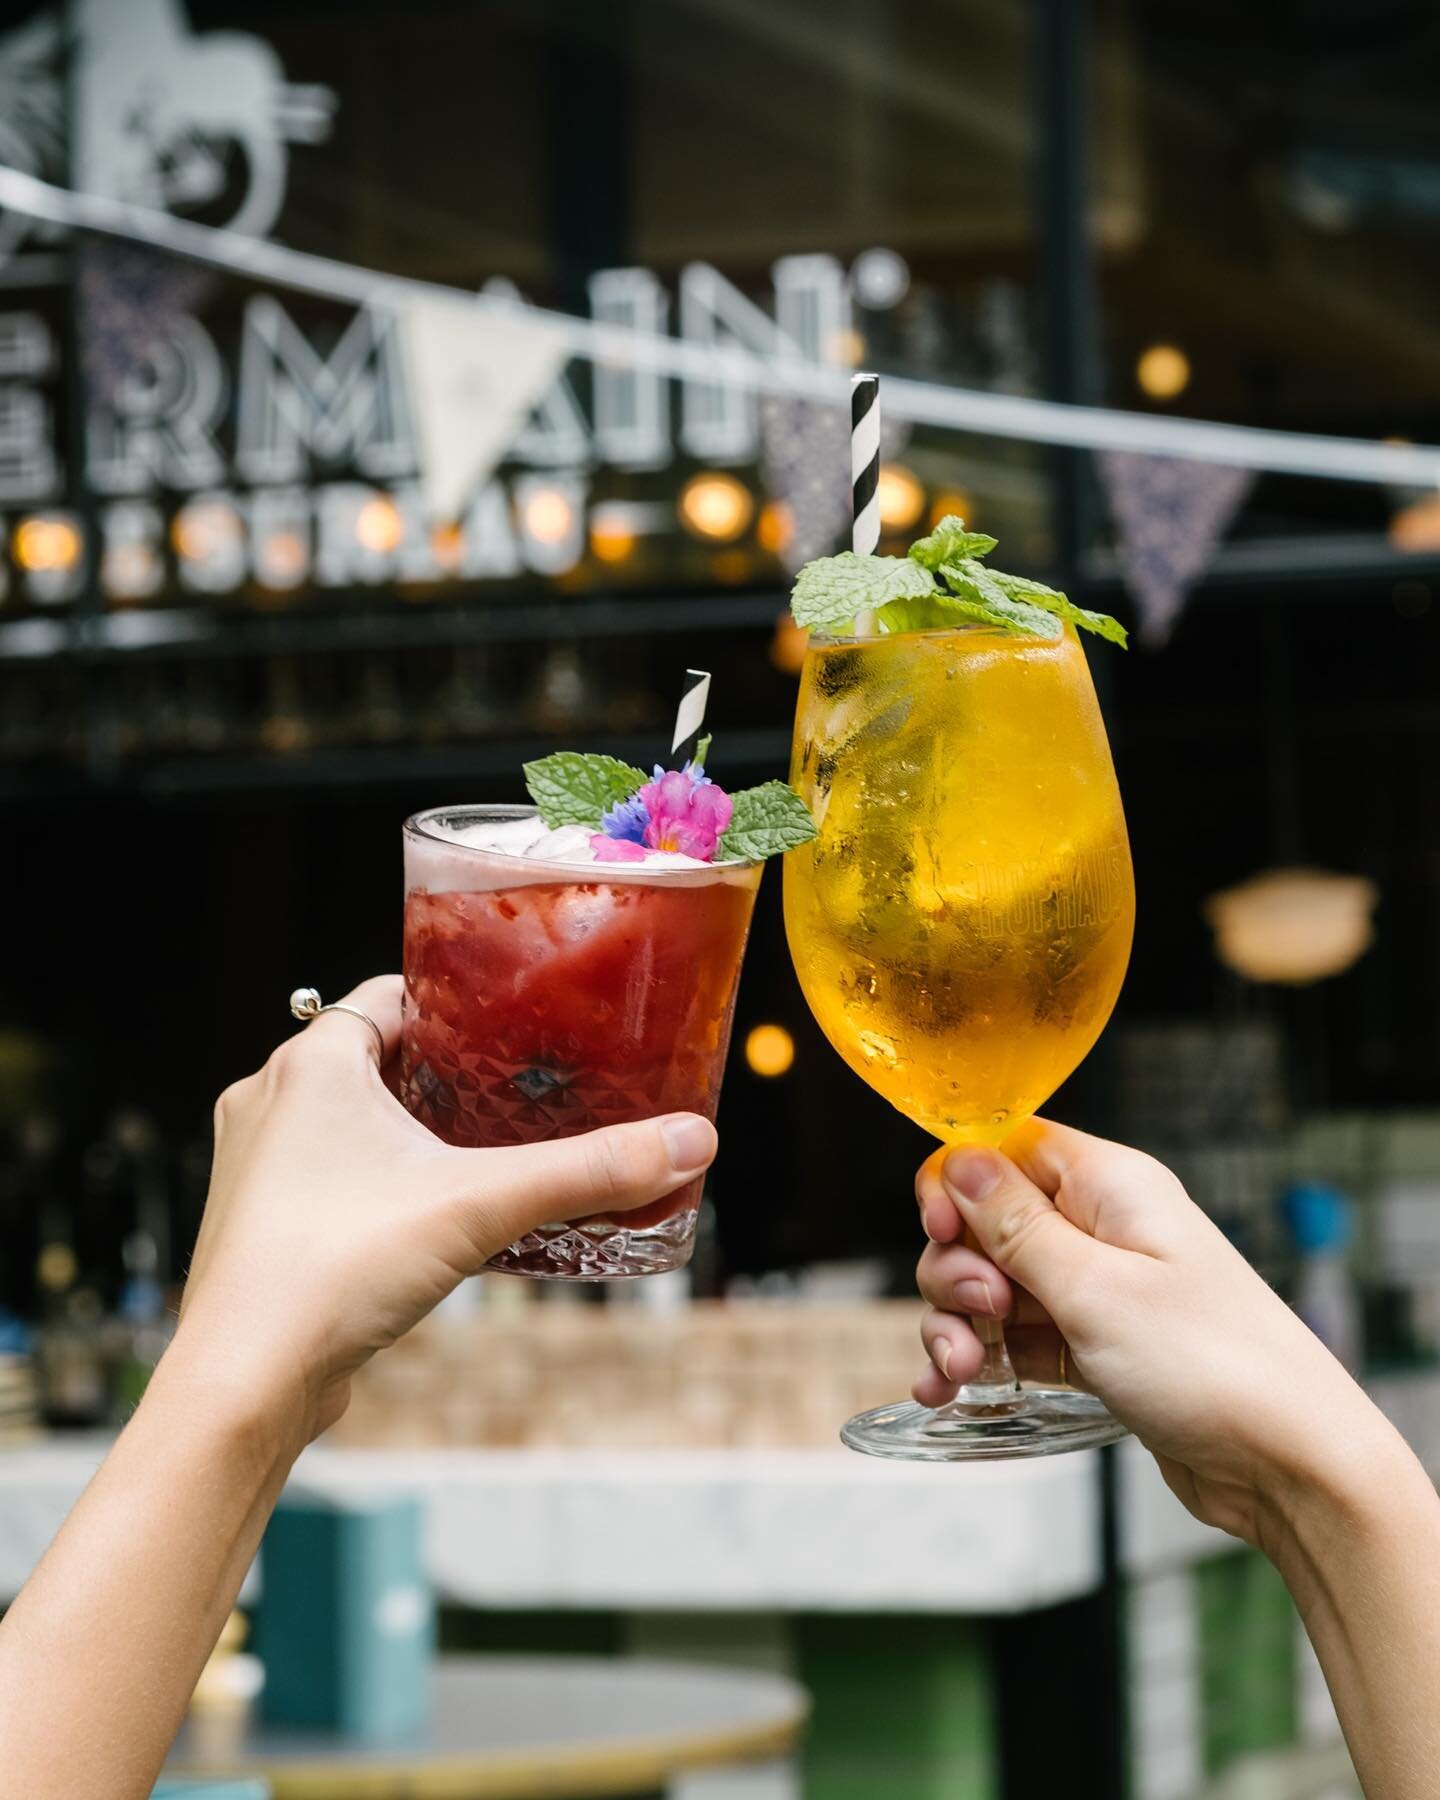 This is what is required to get through hump day! Pick your fave person and meet them at @hophaus for after work drinks 🍹 Shot with @at.social for @southgate_melb